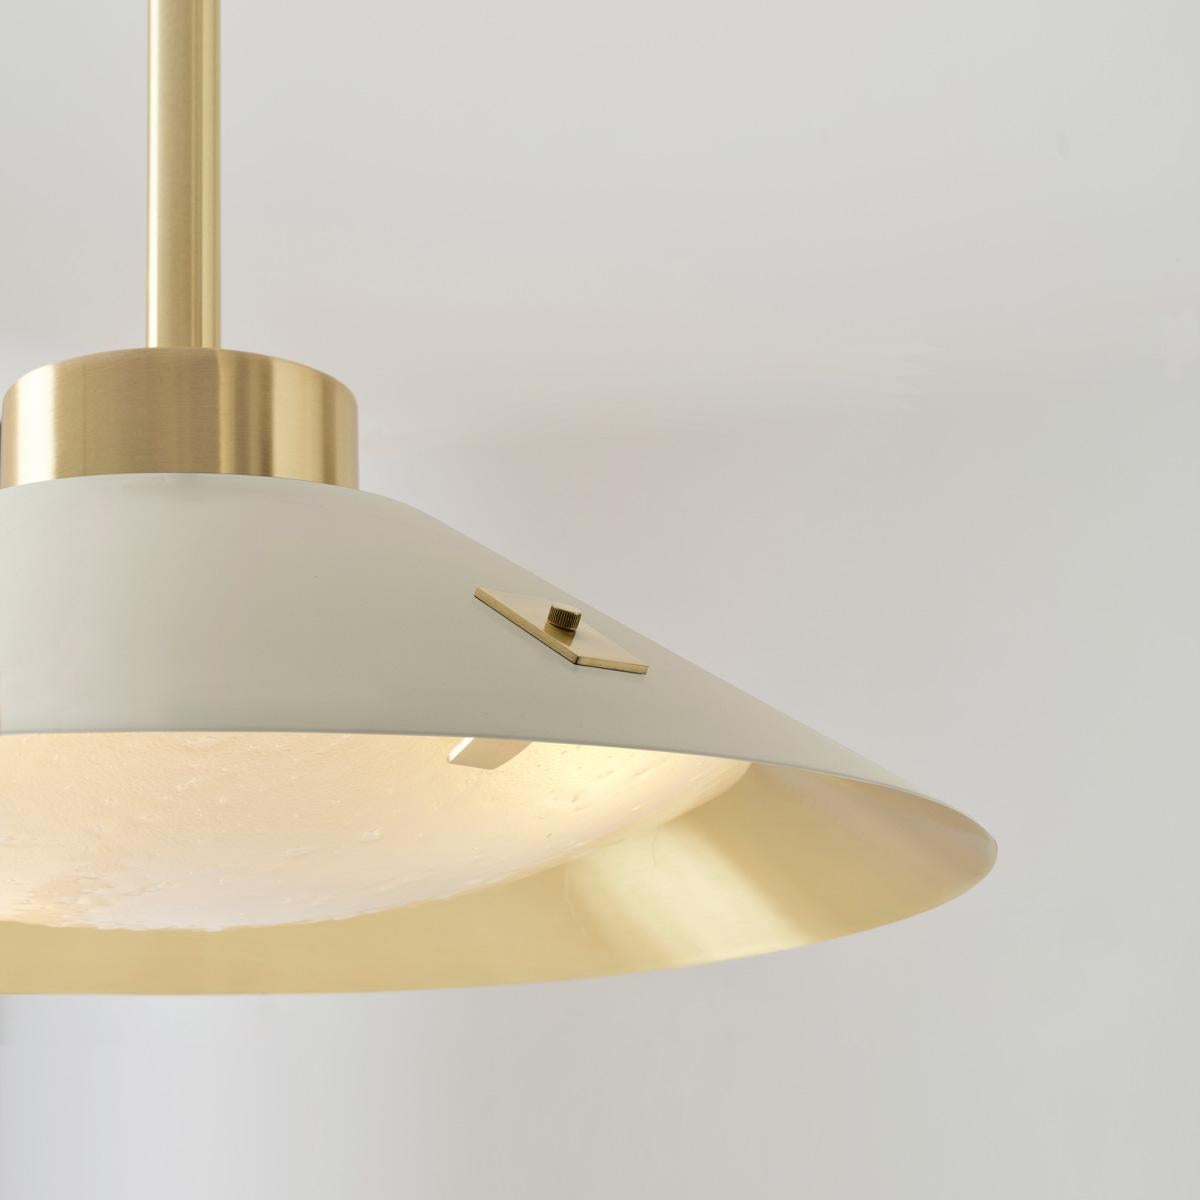 Kono Pendant by Gaspare Asaro. Satin Brass and Stone Grey For Sale 6